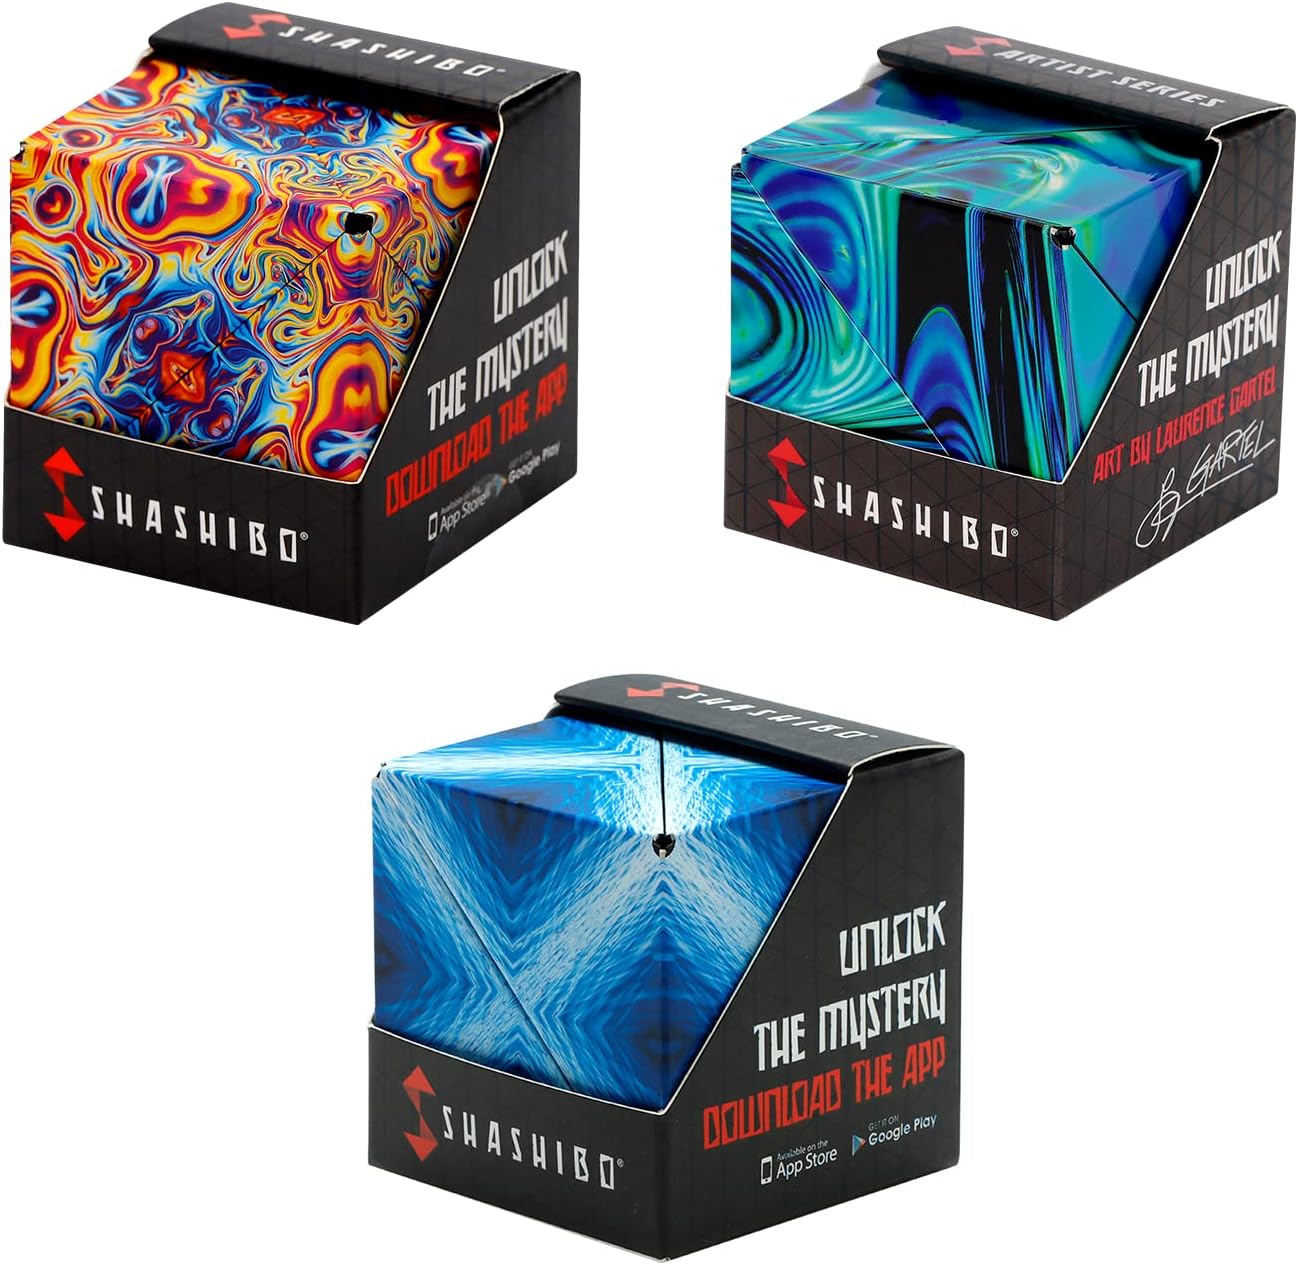 Read more about the article Shashibo’s Shapeshifting Secrets: A Guide to the Magic Morphing Magnet Puzzle Cube